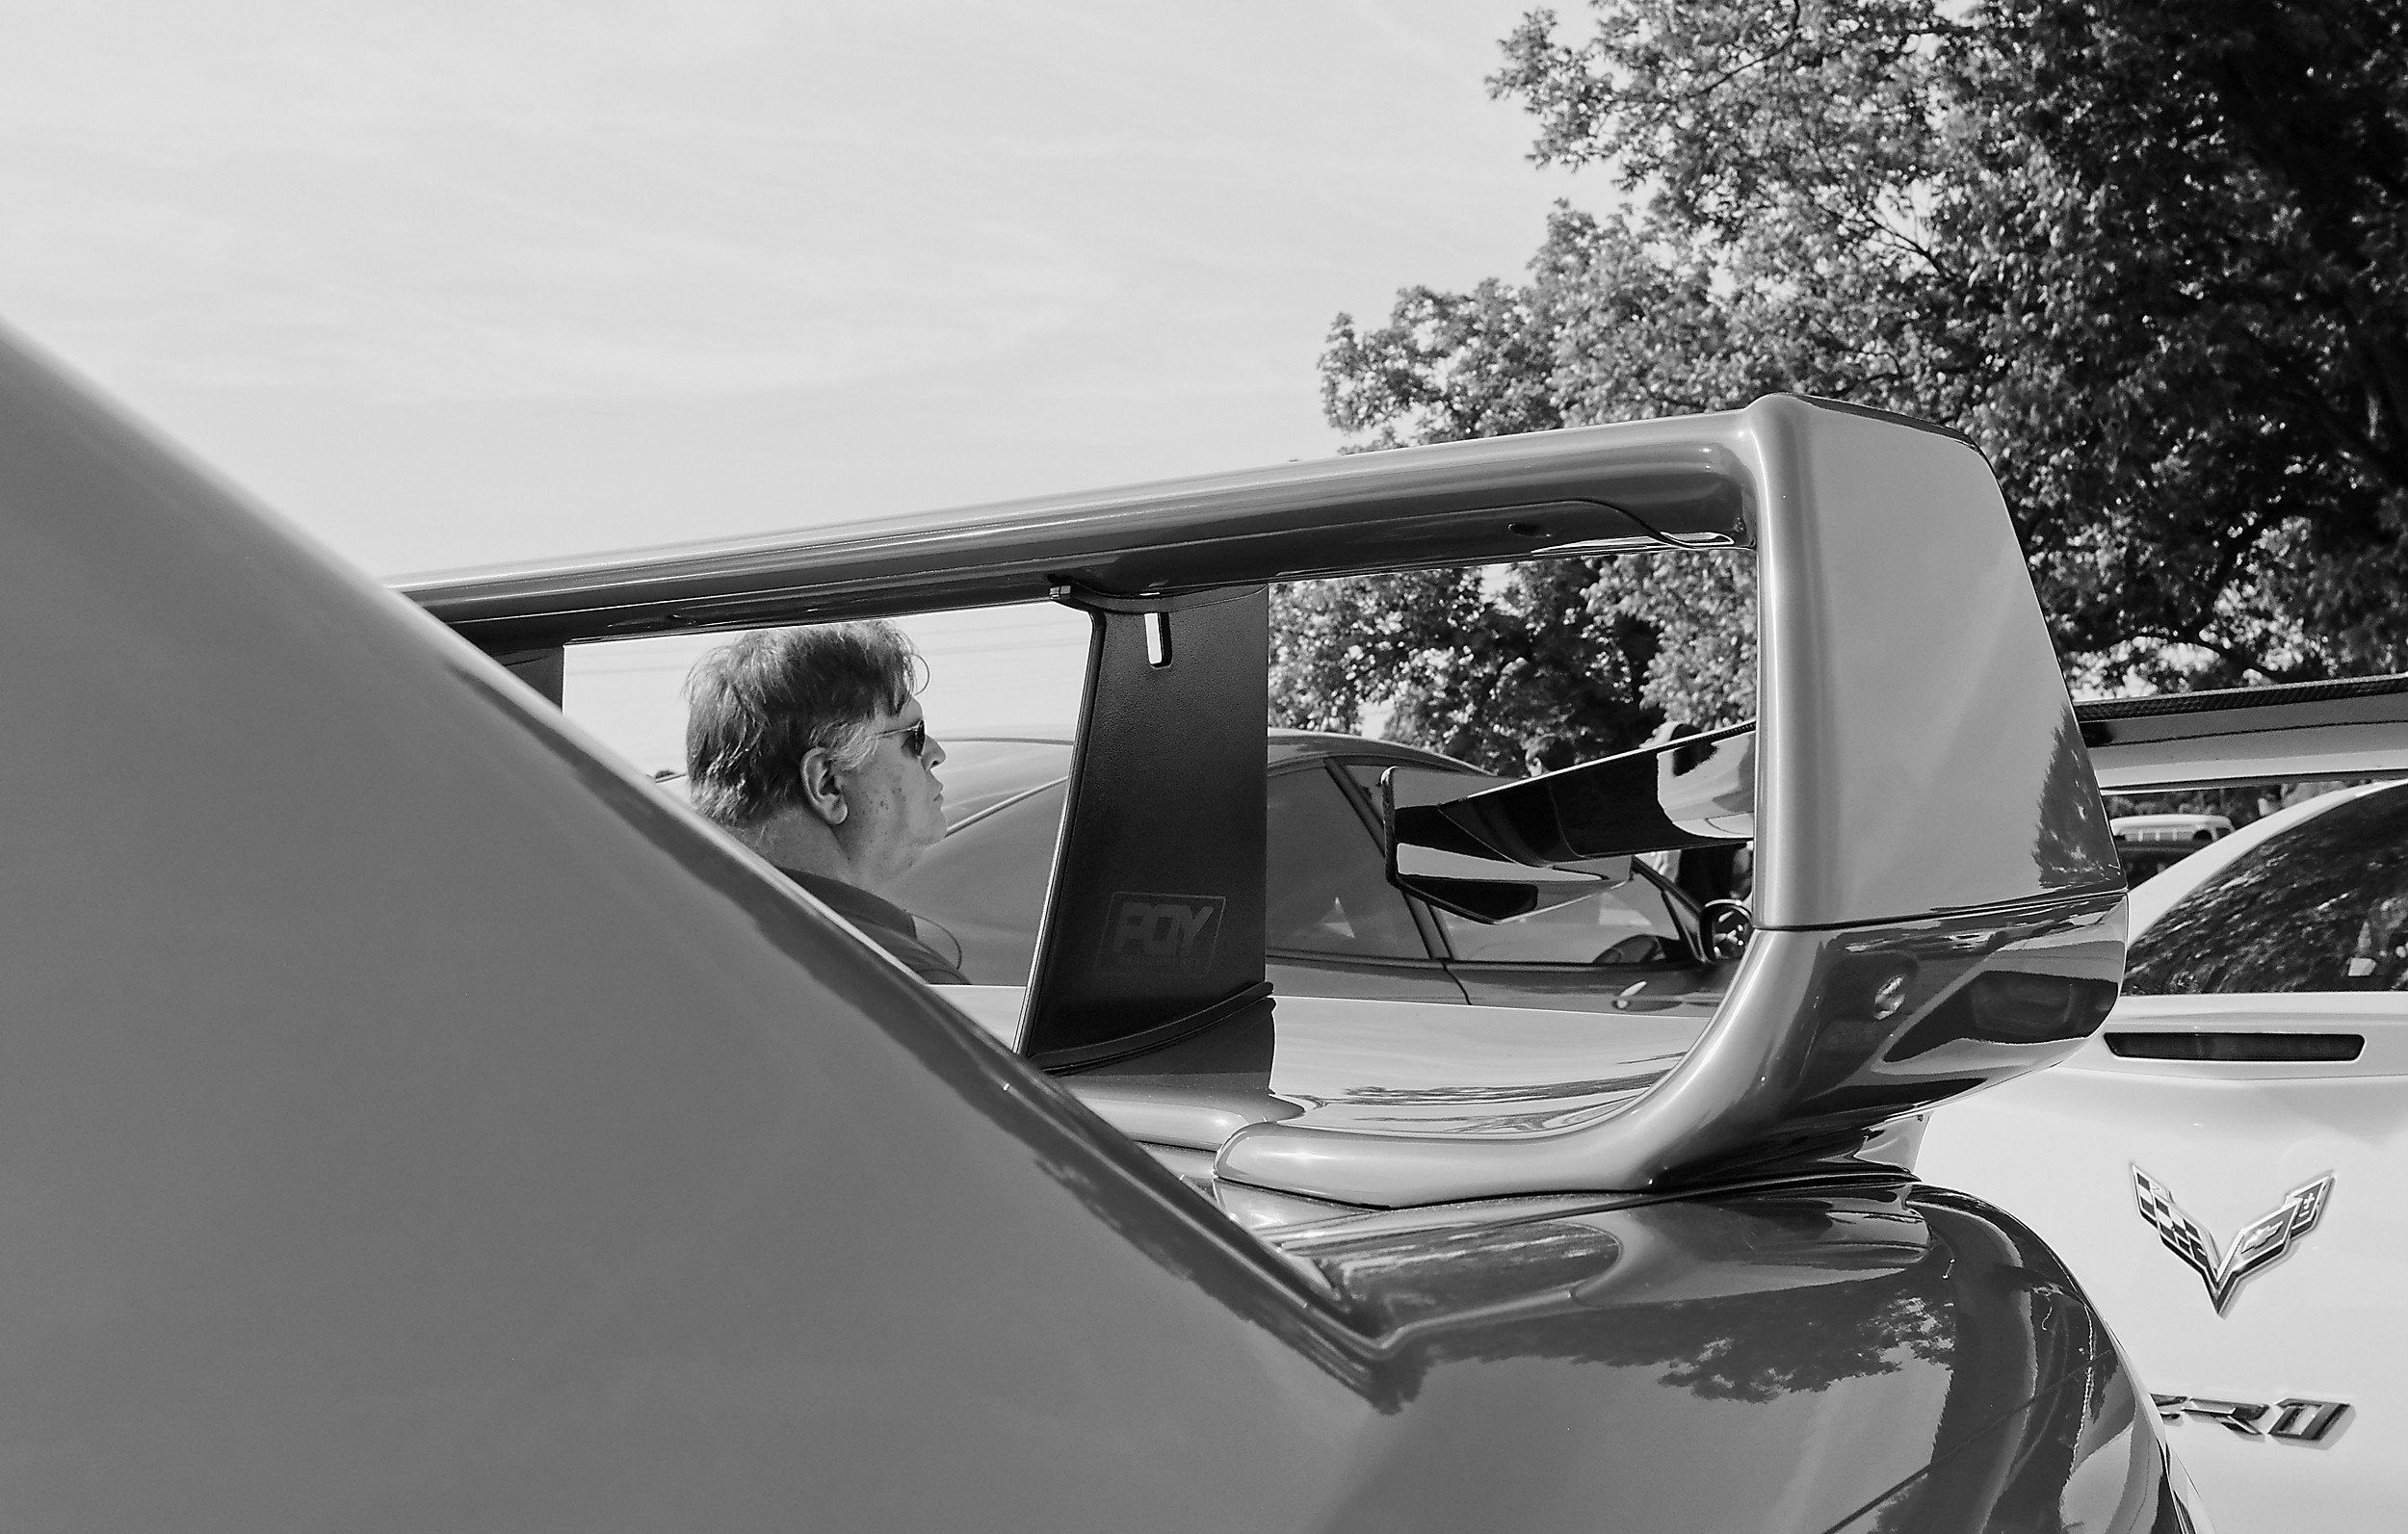  black and white image of the head of a man as seen through the wing of a car at a car show 